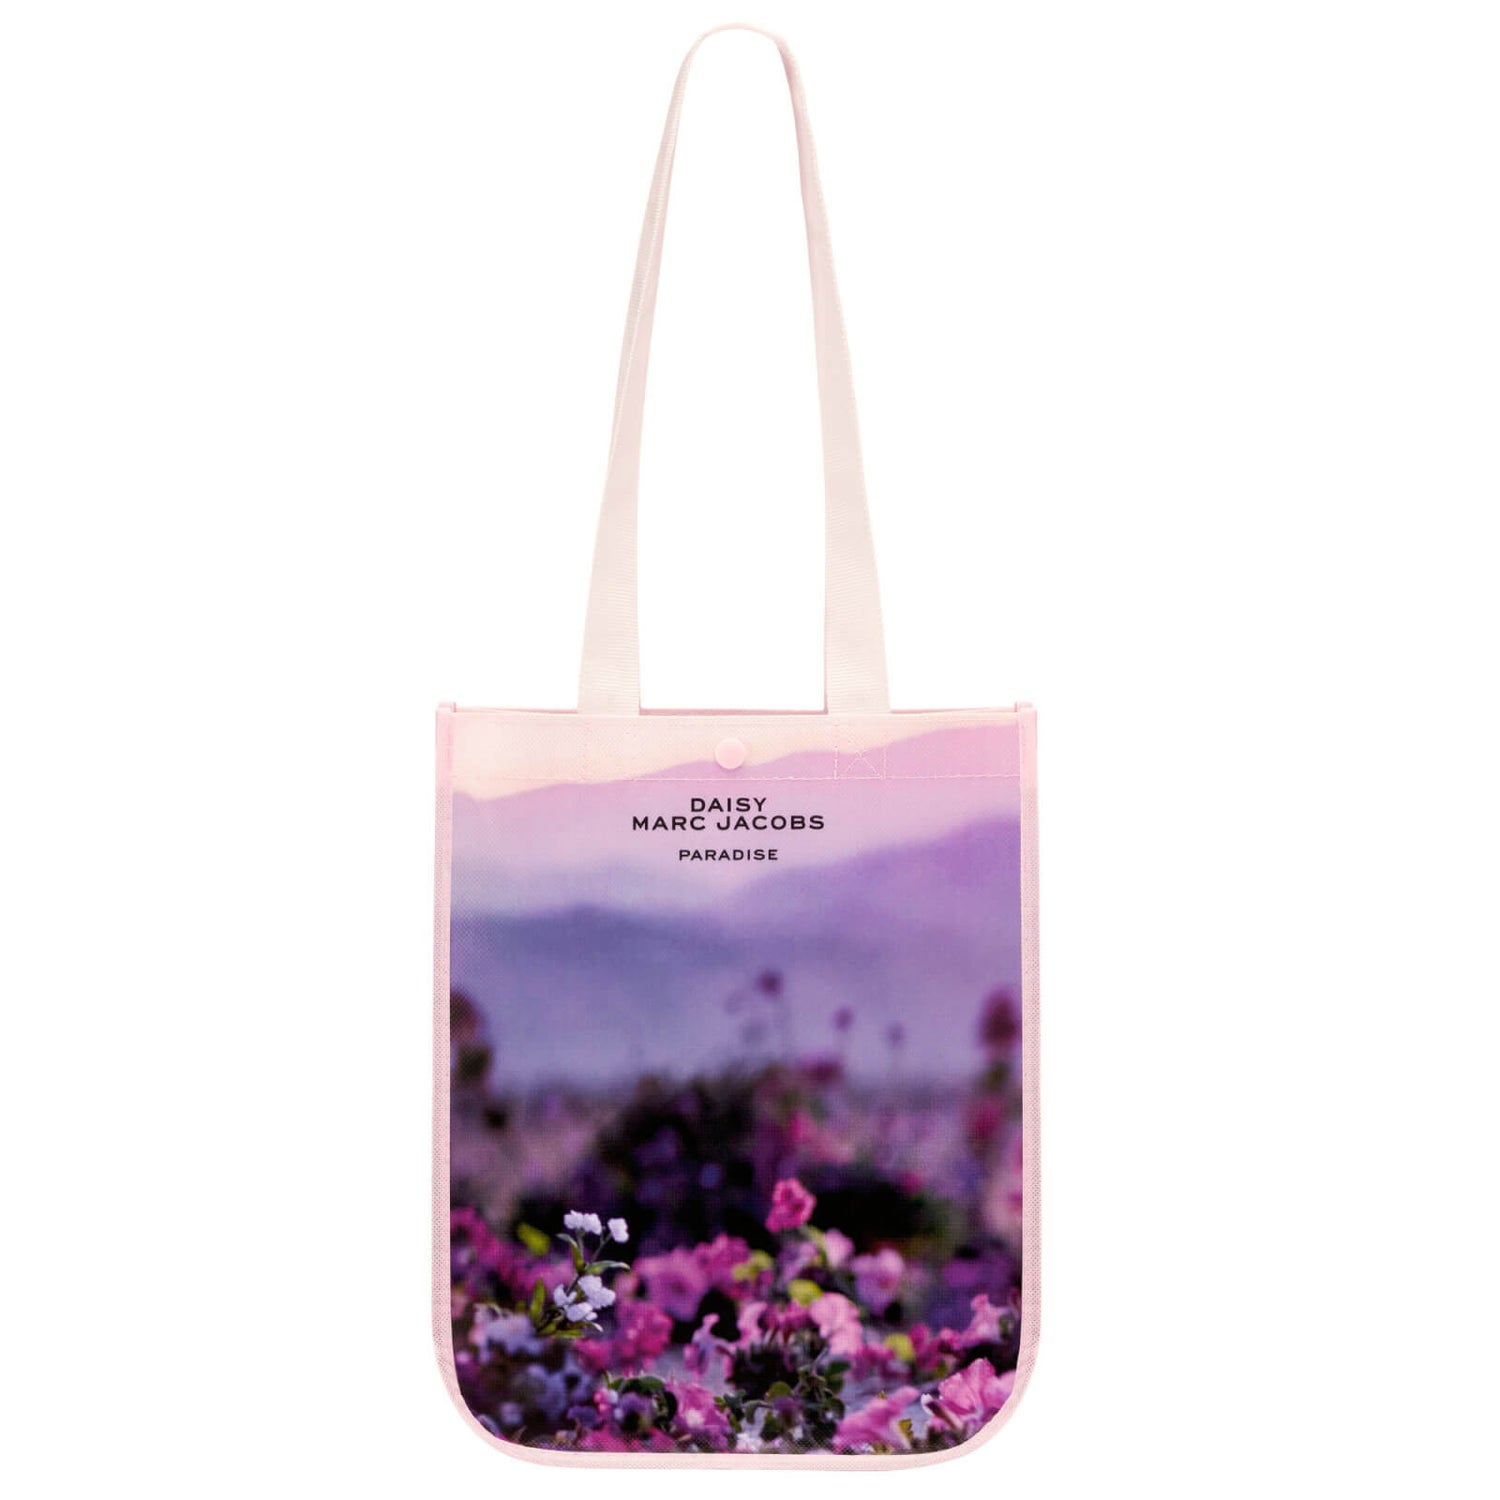 Marc Jacobs Paradise Limited Edition Tote Bag - LOOKFANTASTIC